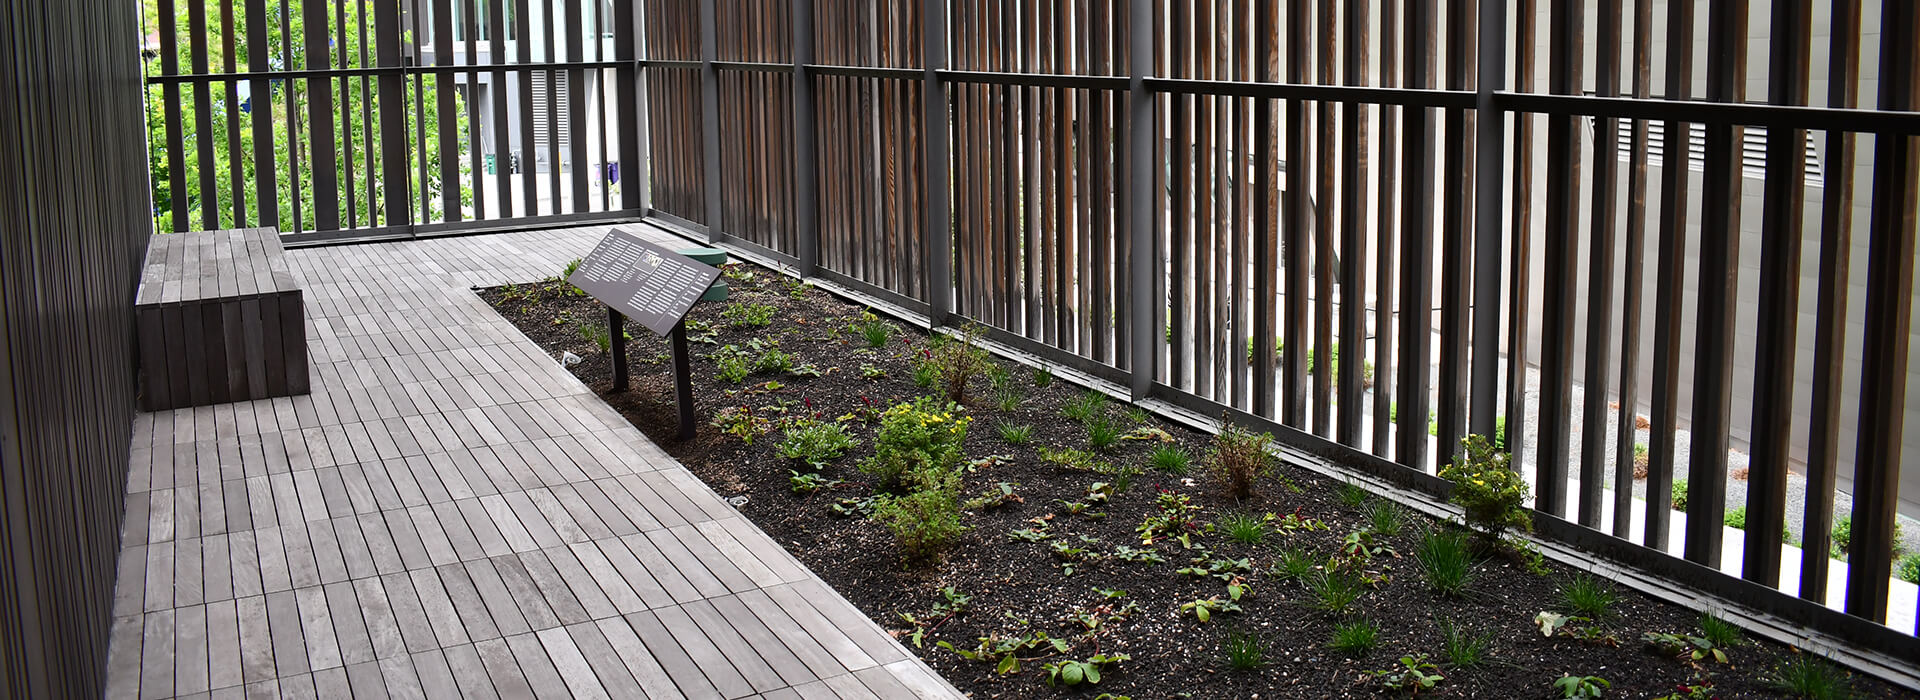 Installation image of a terrace at the Clyfford Still Museum with new plants